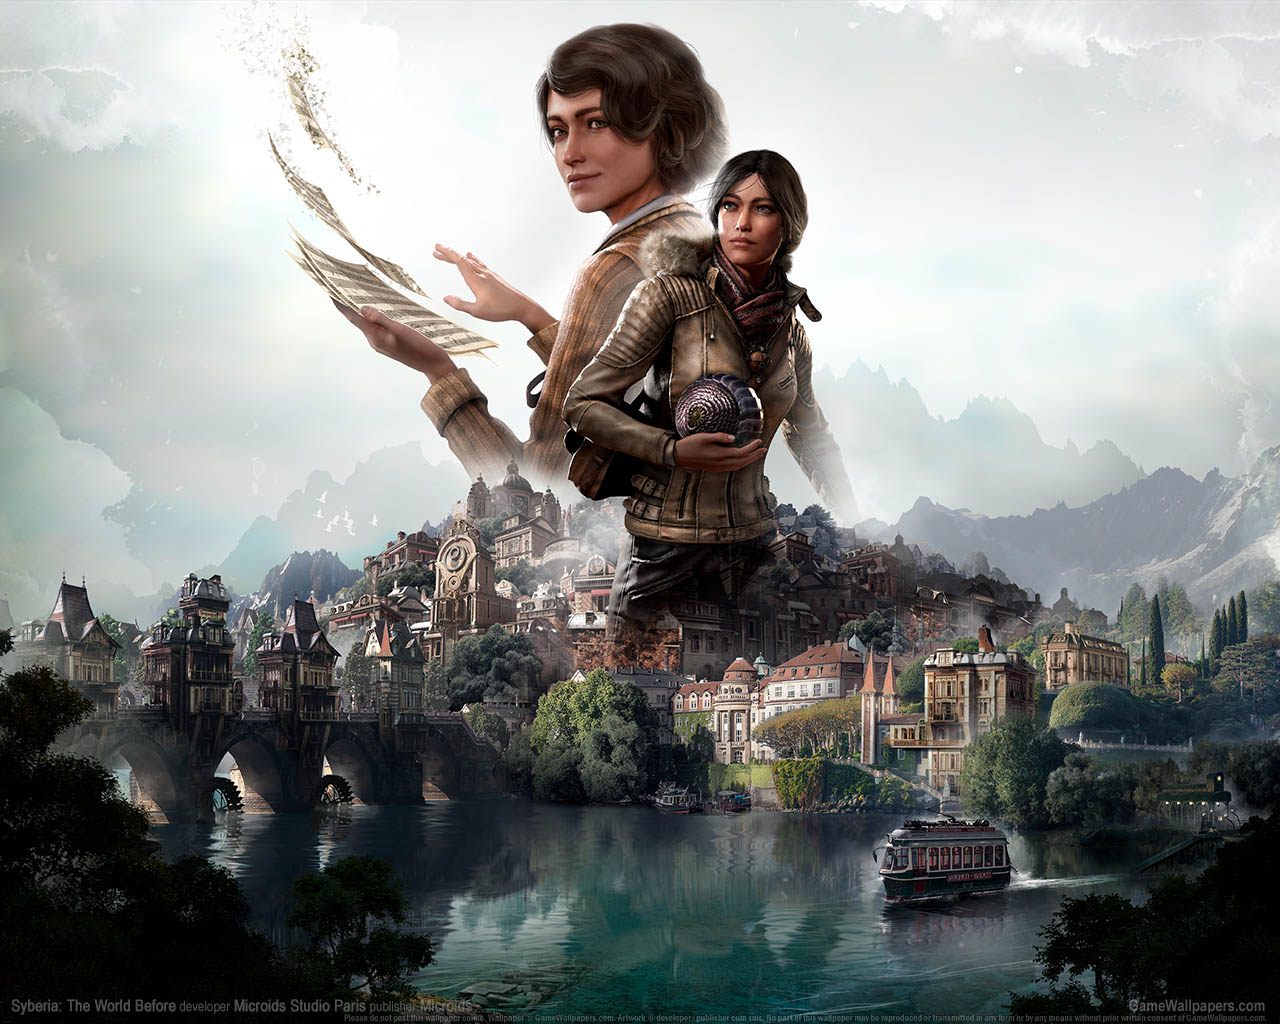 Syberia%3A The World Before wallpaper 01 1280x1024